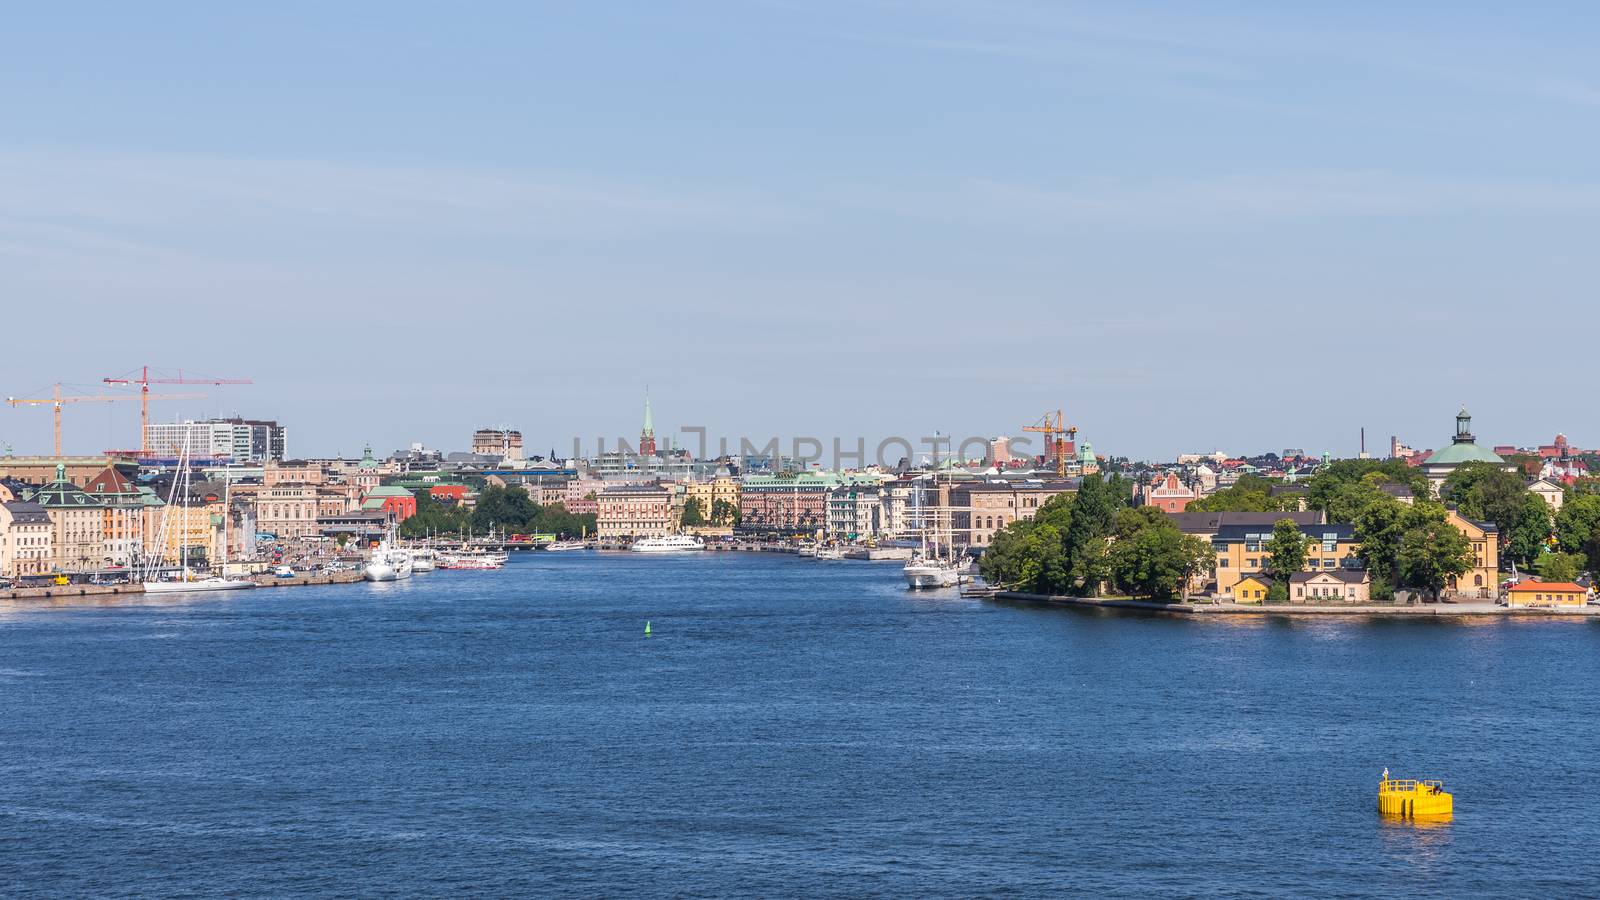 Cityscape with the Skeppsholmen islet on the right and The Old Town dating back to the 13th century on the left. Town has a rich collection of medieval architecture.